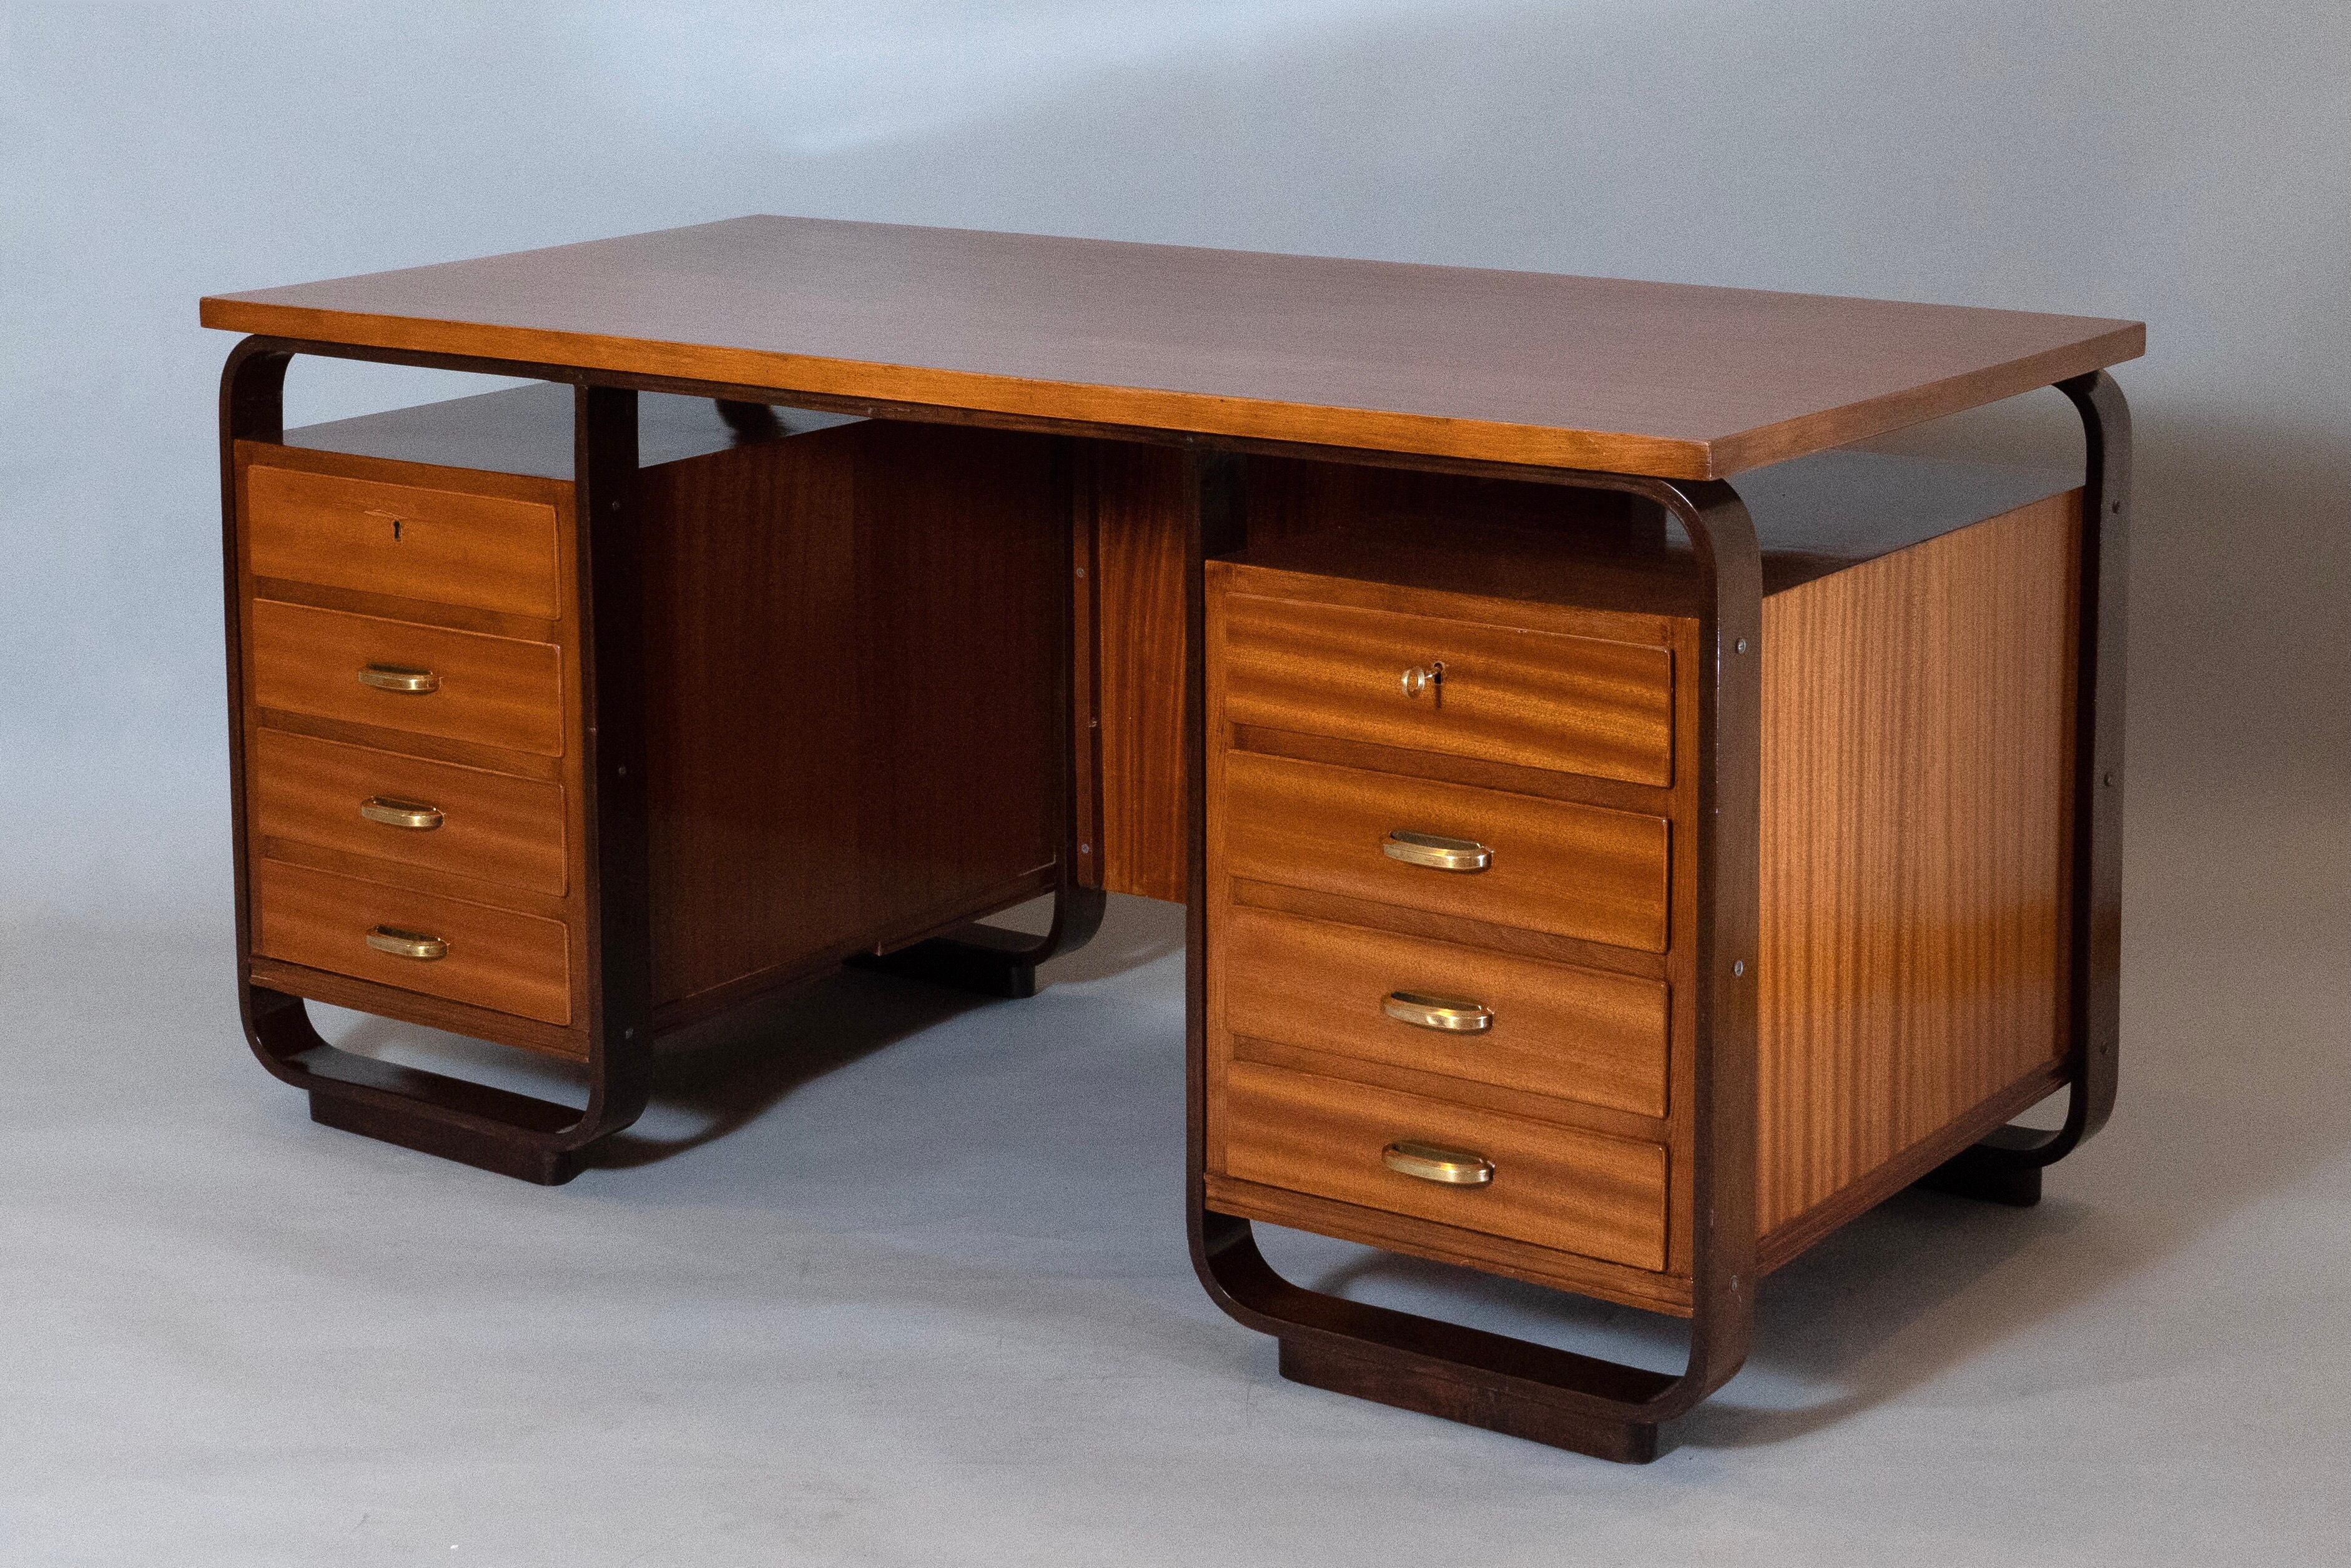 Giuseppe Pagano: Eight Drawer Desk in Fruitwood and Brass, Italy 1940 For Sale 4